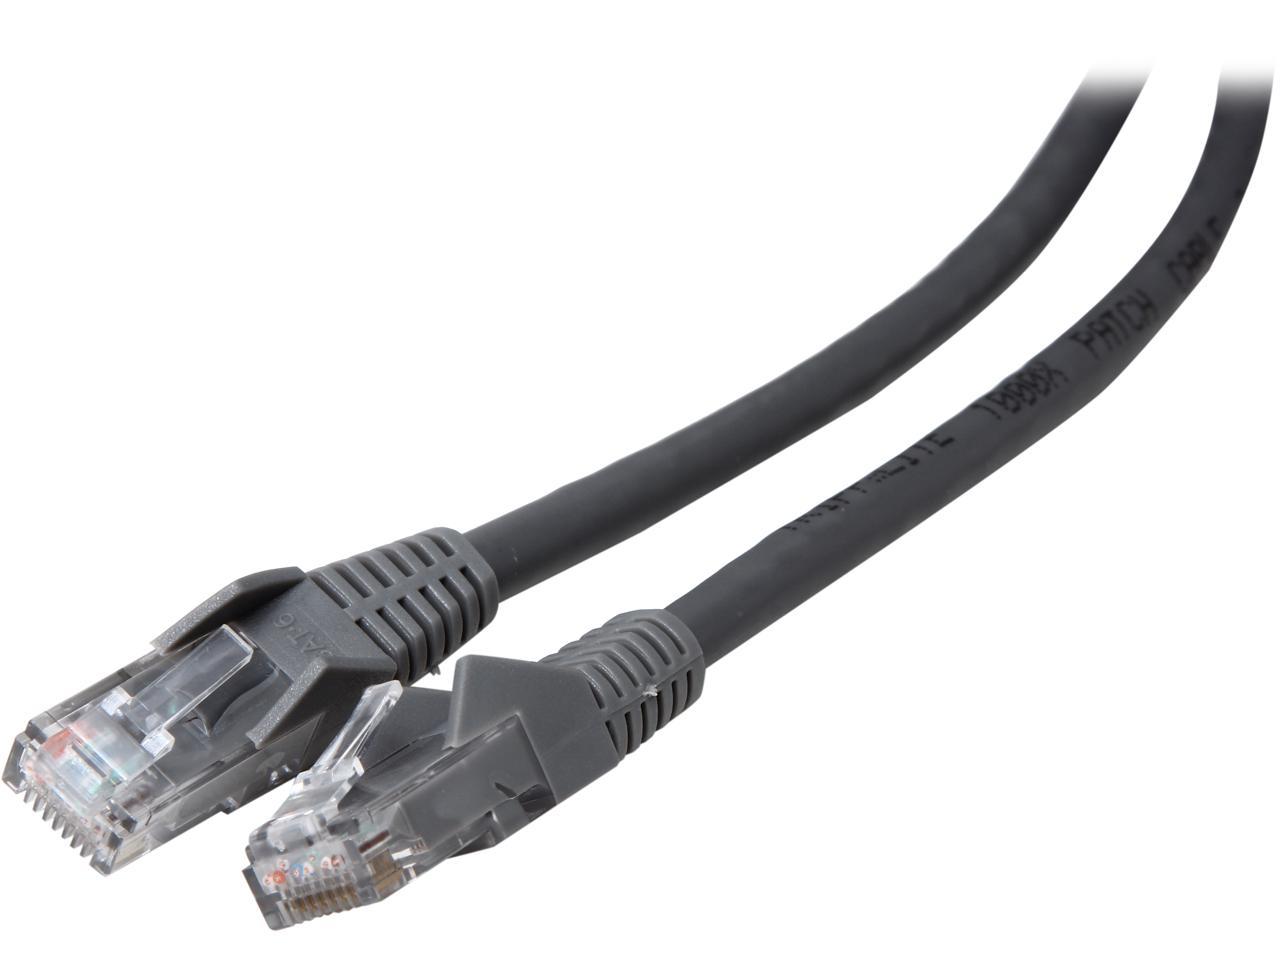 TRIPP LITE N201-006-GY 6 ft. Cat 6 Gray Gigabit Snagless Molded Patch Cable